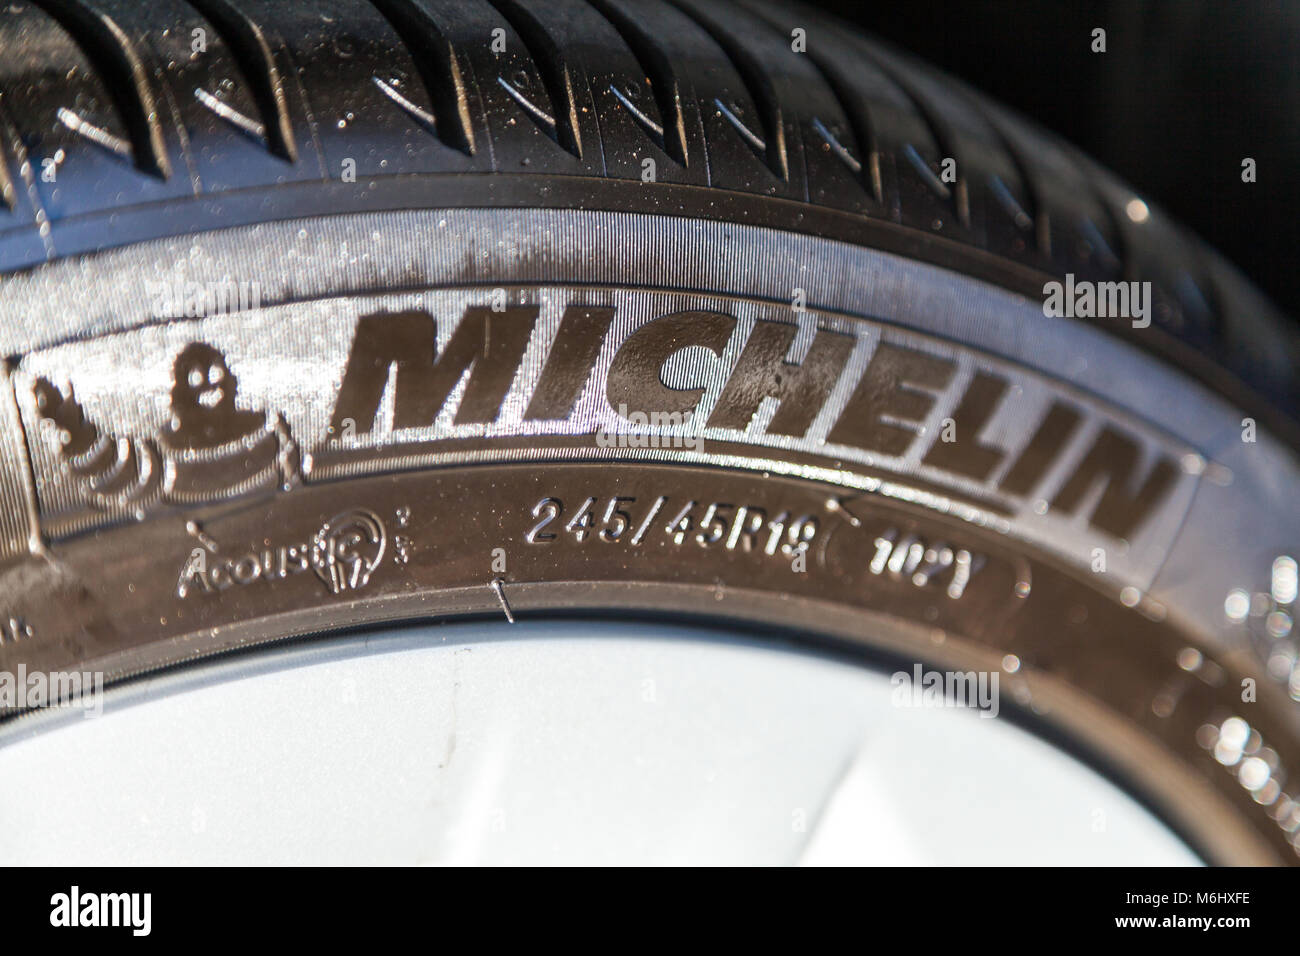 FUERTH / GERMANY - MARCH 4, 2018: Michelin logo on a tire. Michelin is a French tyre manufacturer based in Clermont-Ferrand in the Auvergne région of  Stock Photo